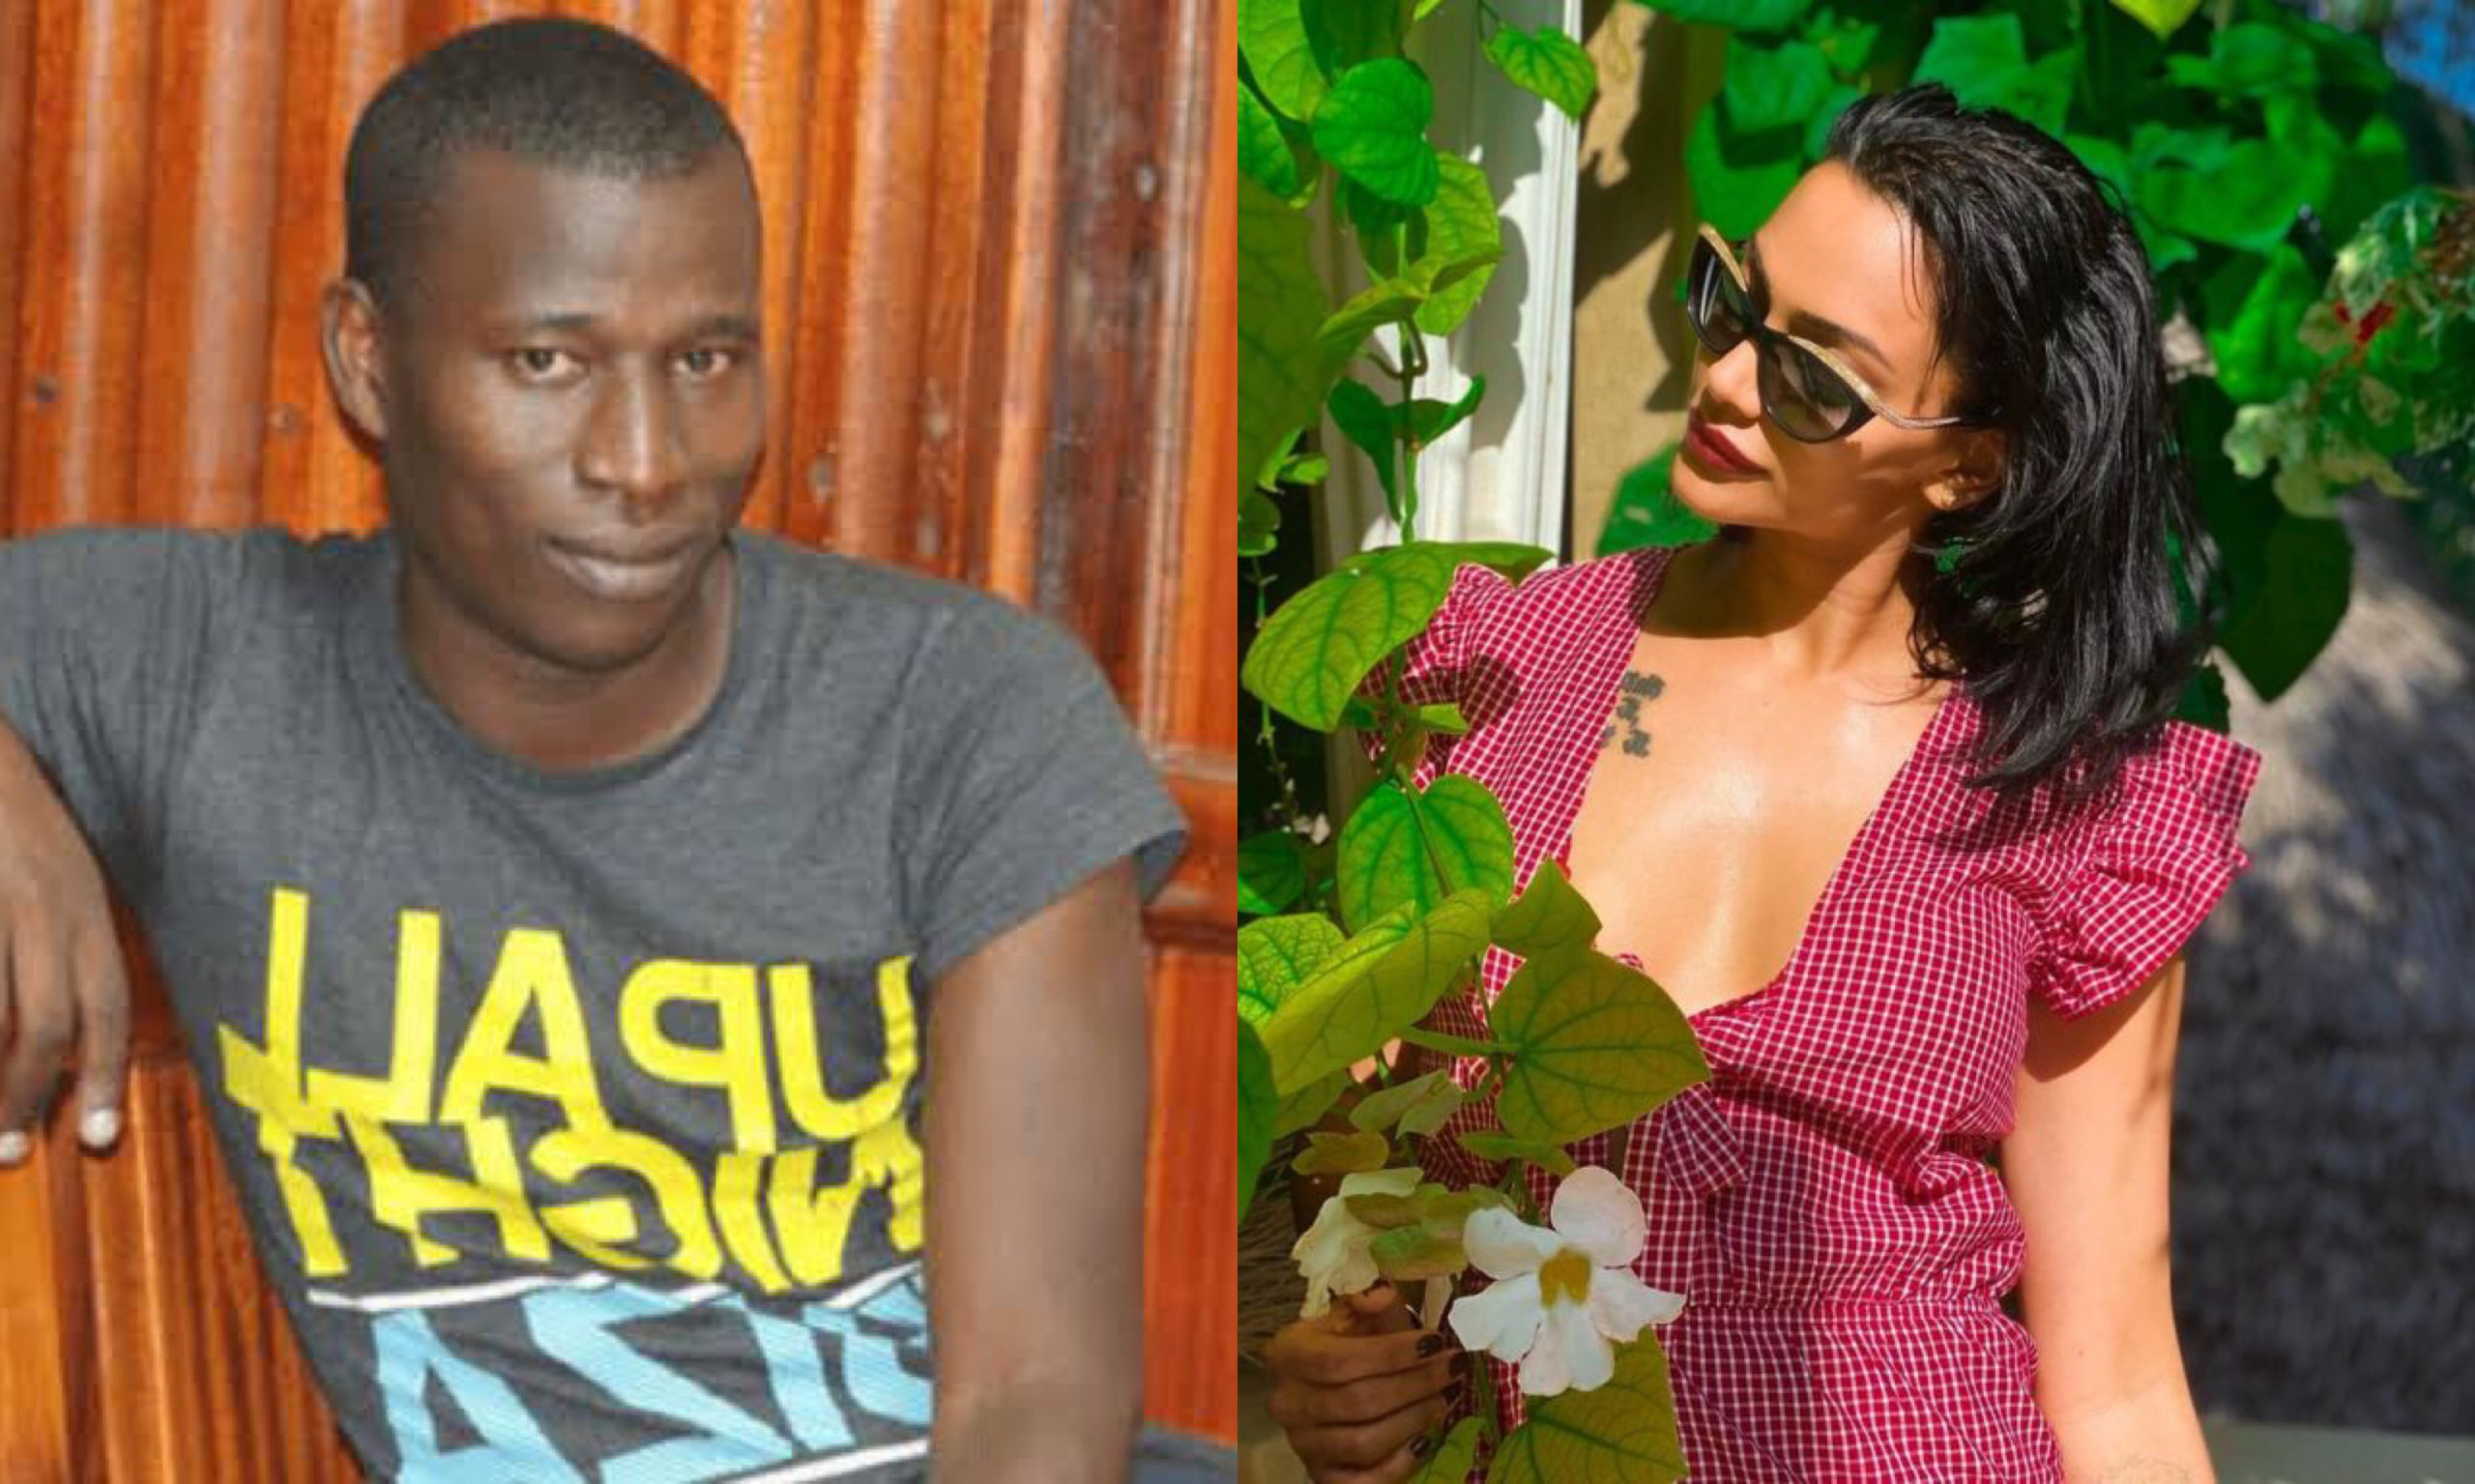 “You should thank me, I made you famous” Cyprian Nyakundi tells hot lady photographed with Omar Lali